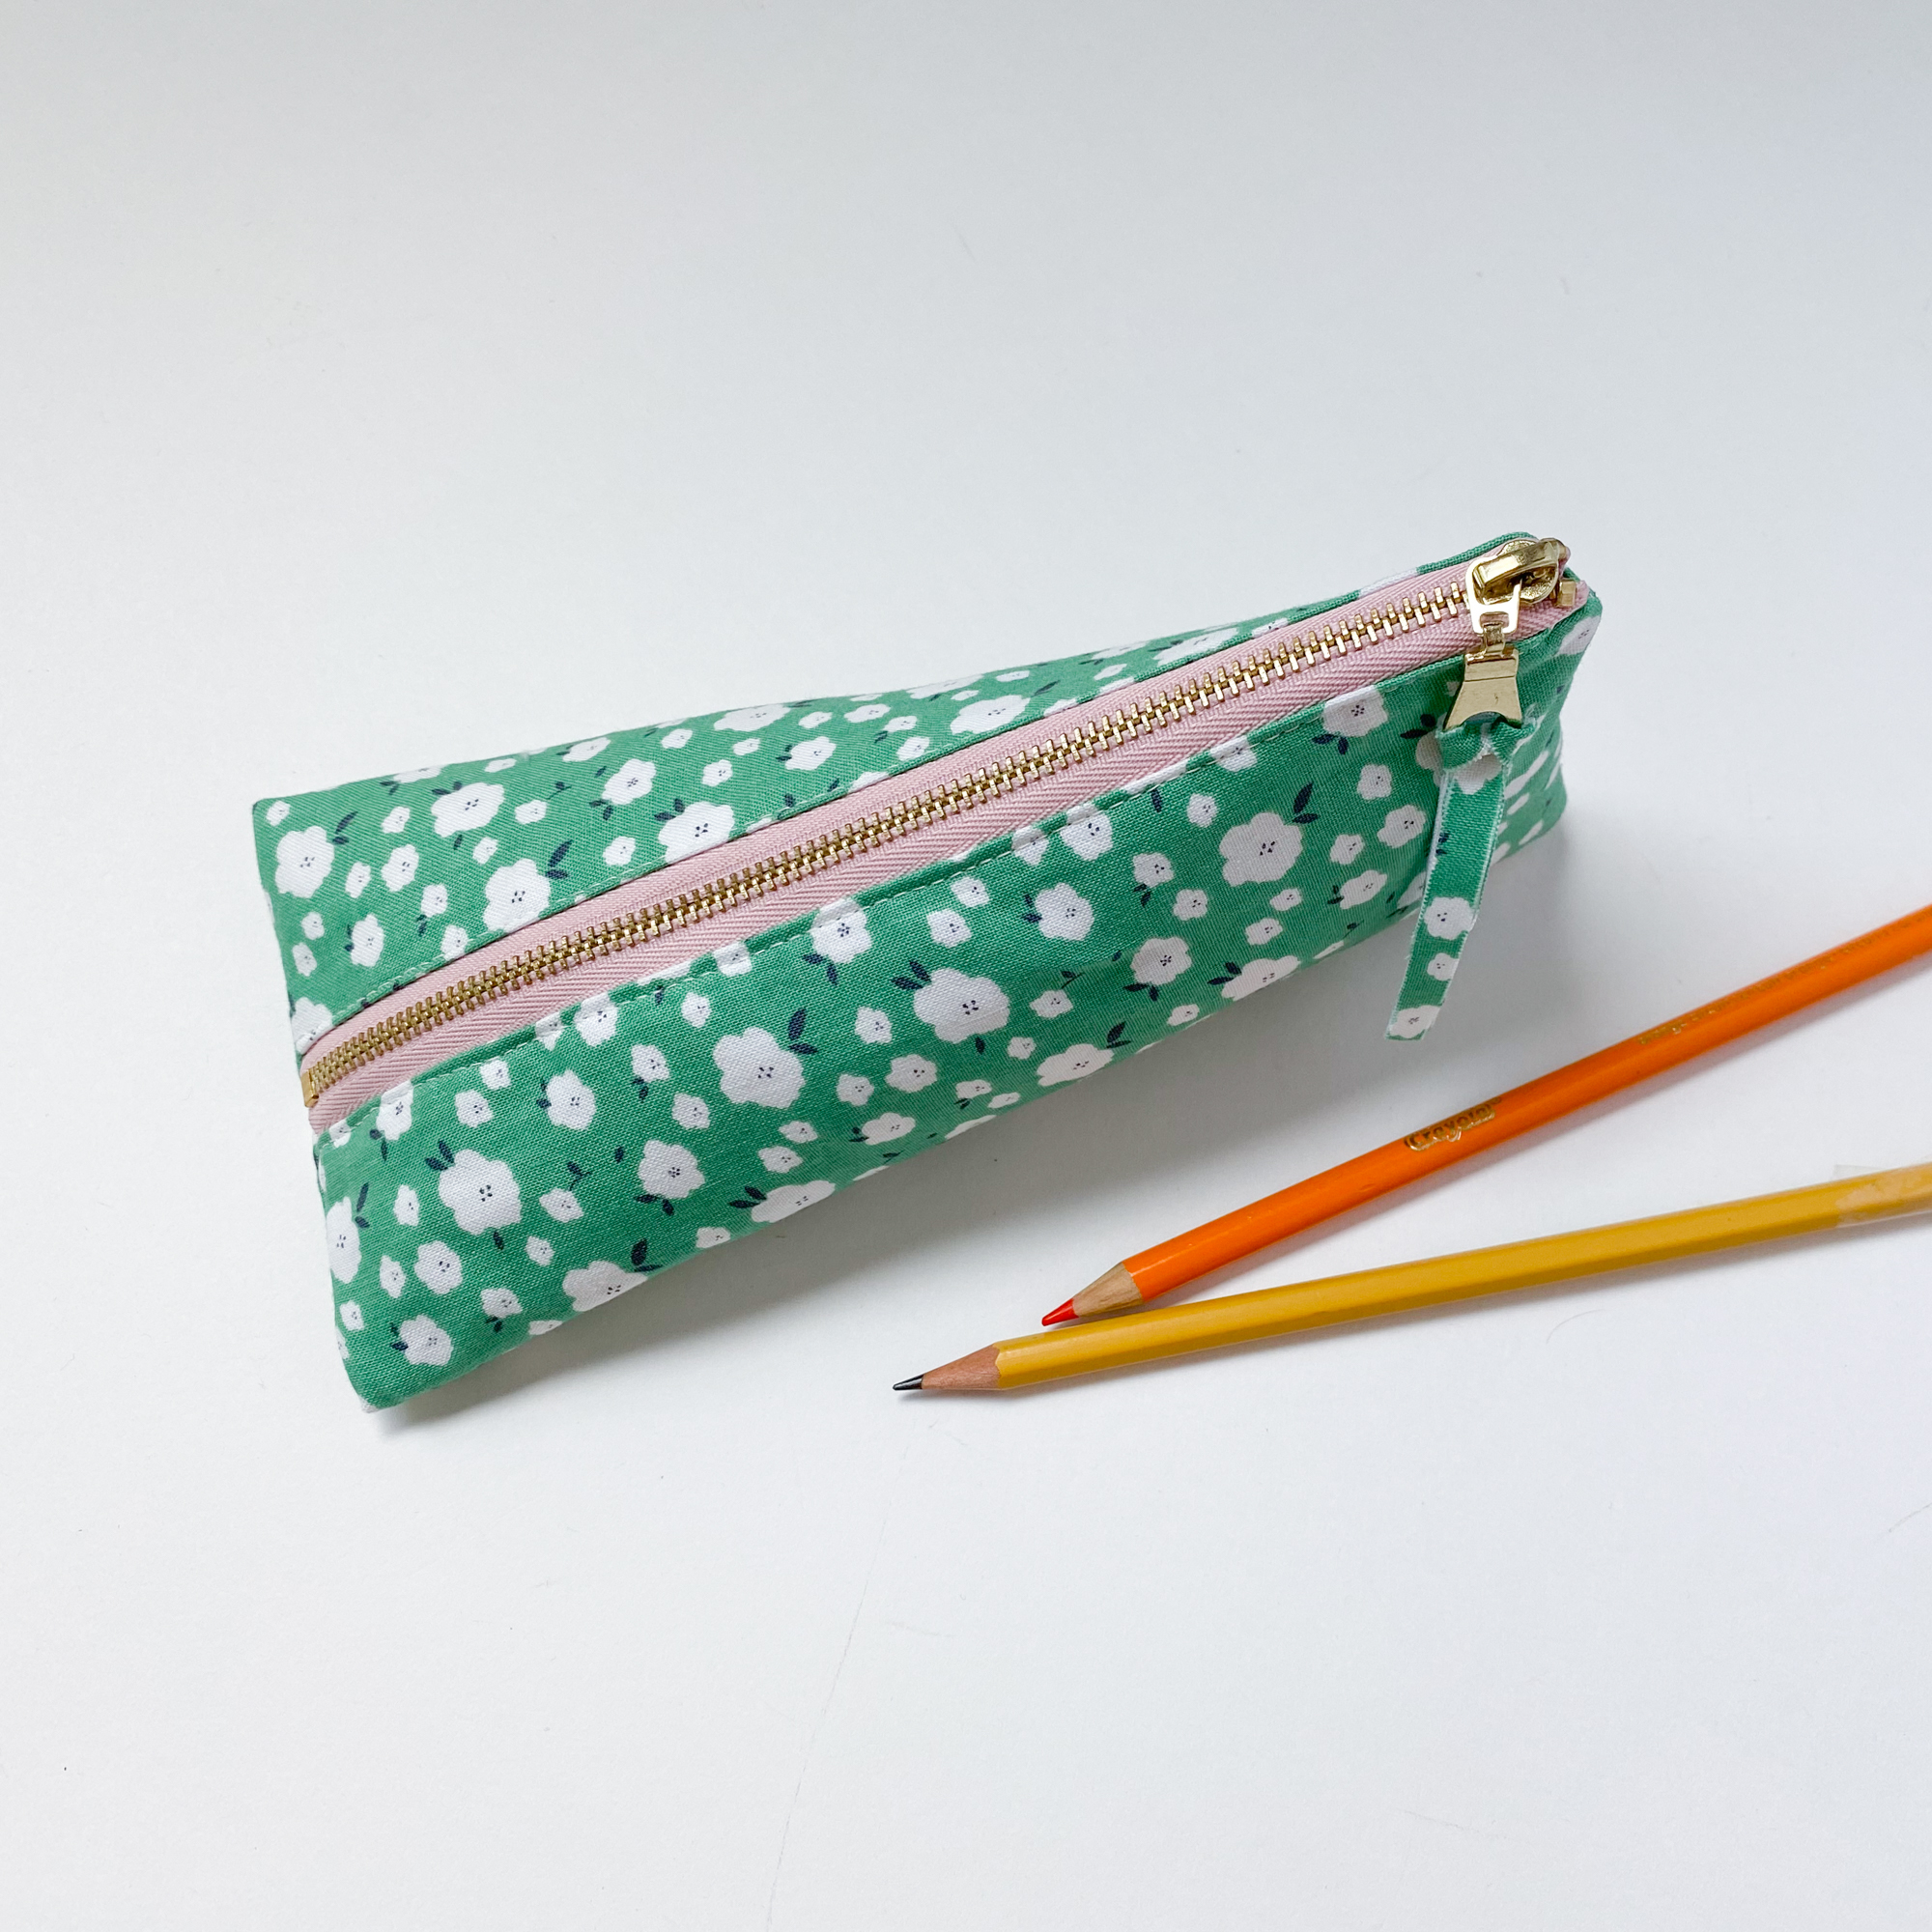 Fabric Pencil, Wide Application Sewing Chalk For Sewing For